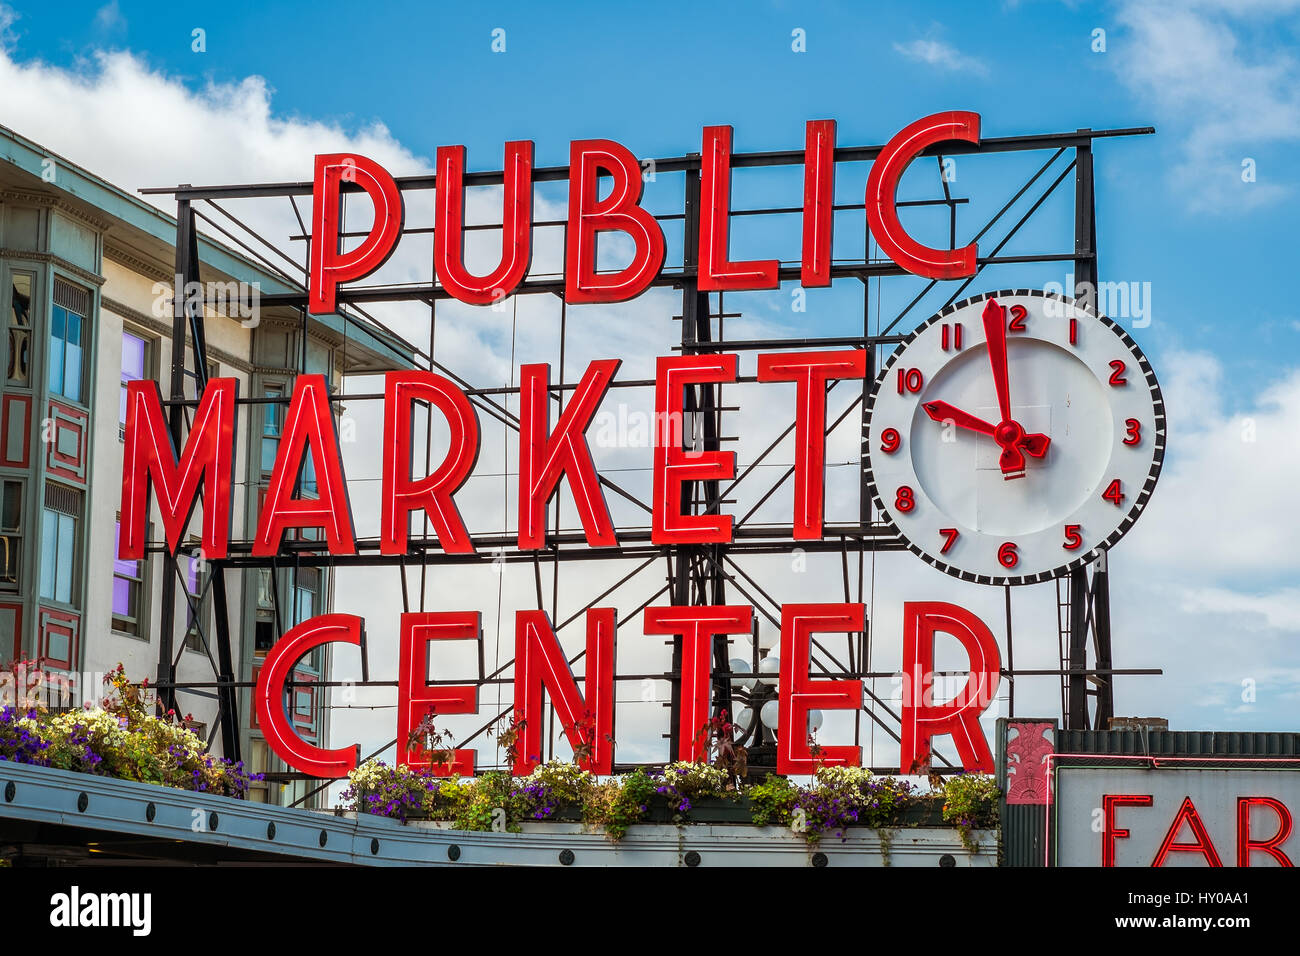 Pike place market sign at Pikes Place Market in Seattle, Washington. Stock photo of the Pike Place Market Sign against sky. Stock Photo